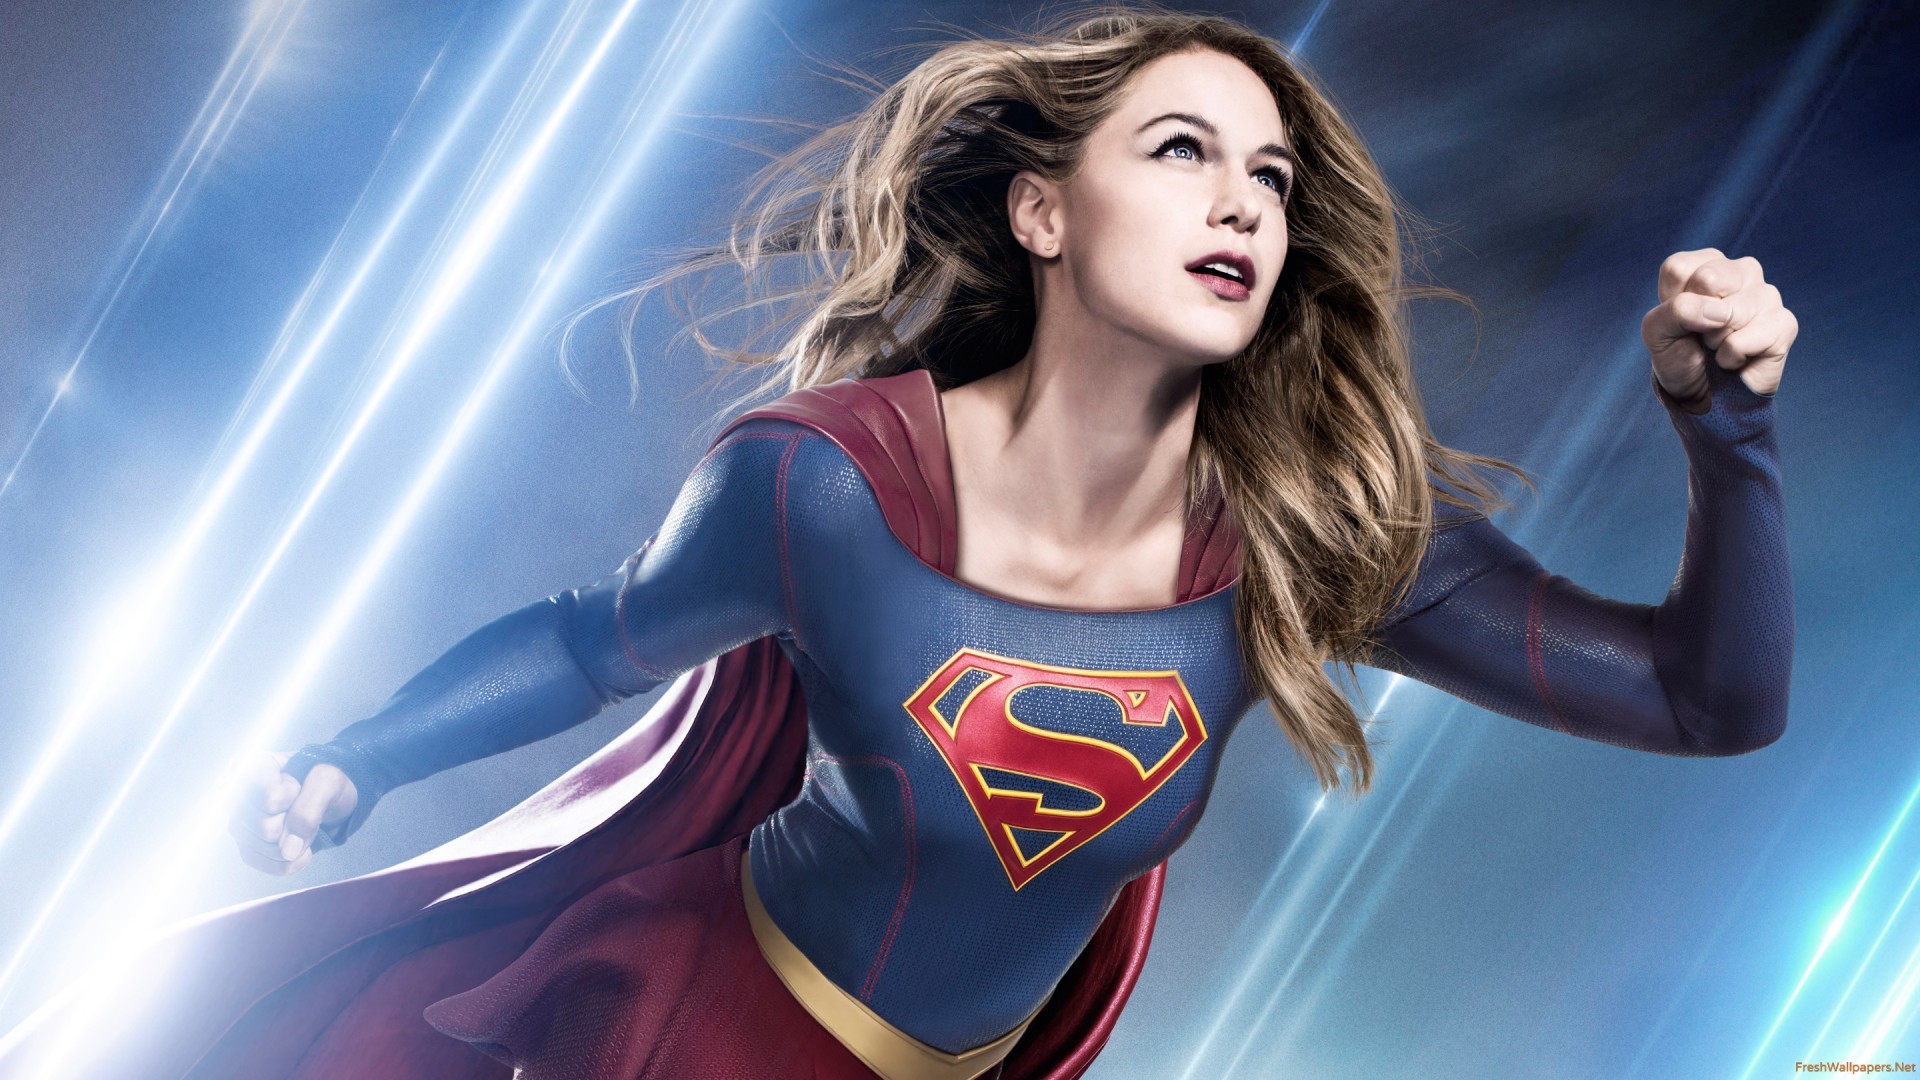 1920x1080 37 Supergirl Wallpapers, HD Quality Supergirl Images, Supergirl .